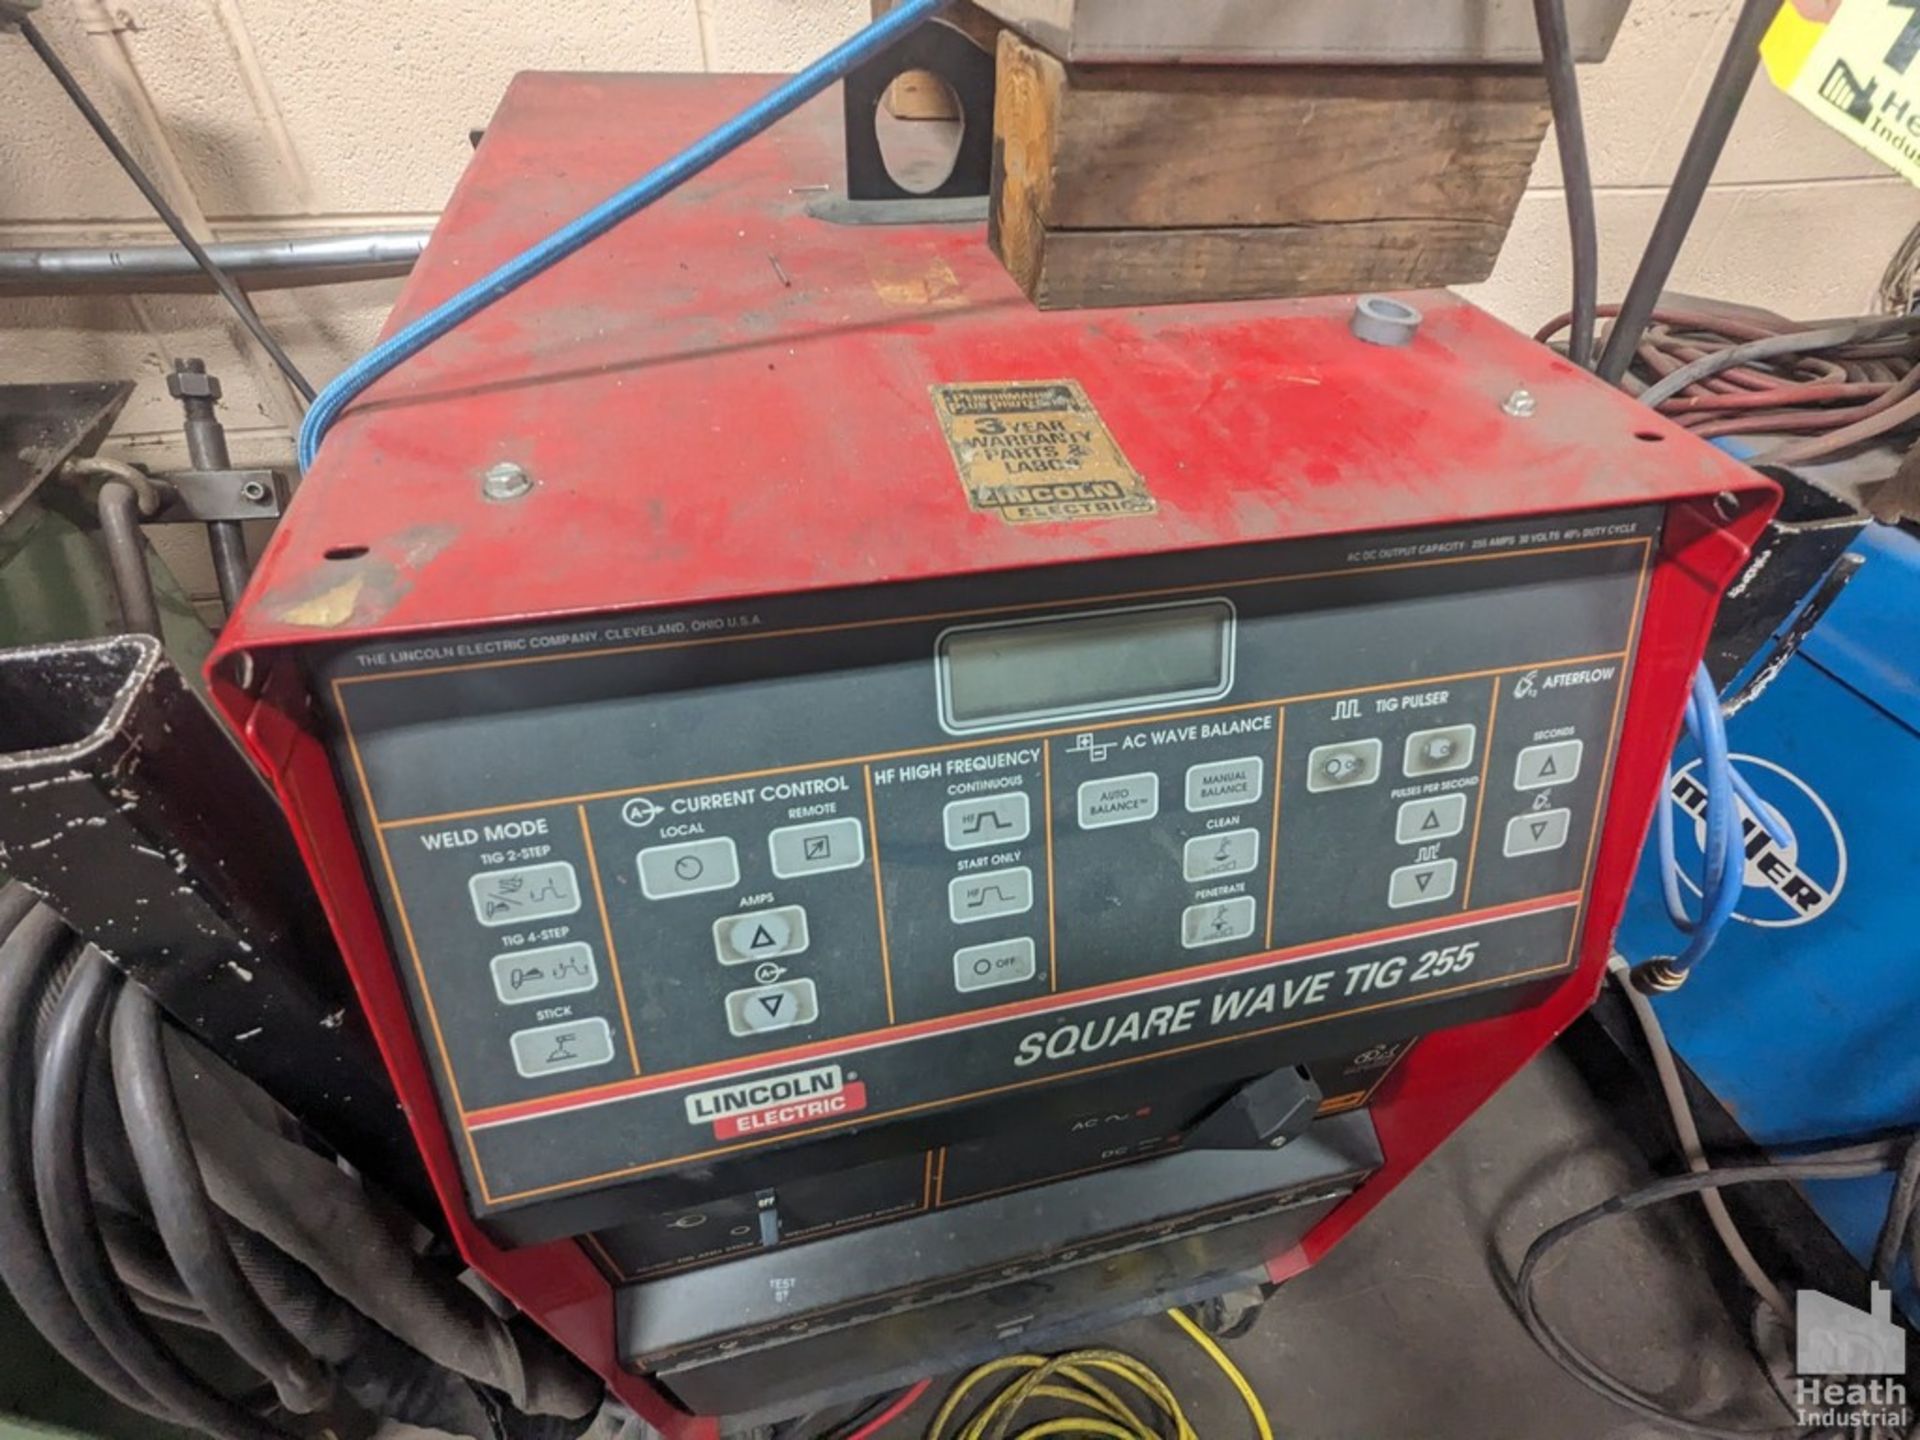 LINCOLN ELECTRIC SQUARE WAVE TIG 255 WELDER 10022-U1960105125 WITH TWECO TC900 WATER COOLER, FOOT - Image 3 of 6